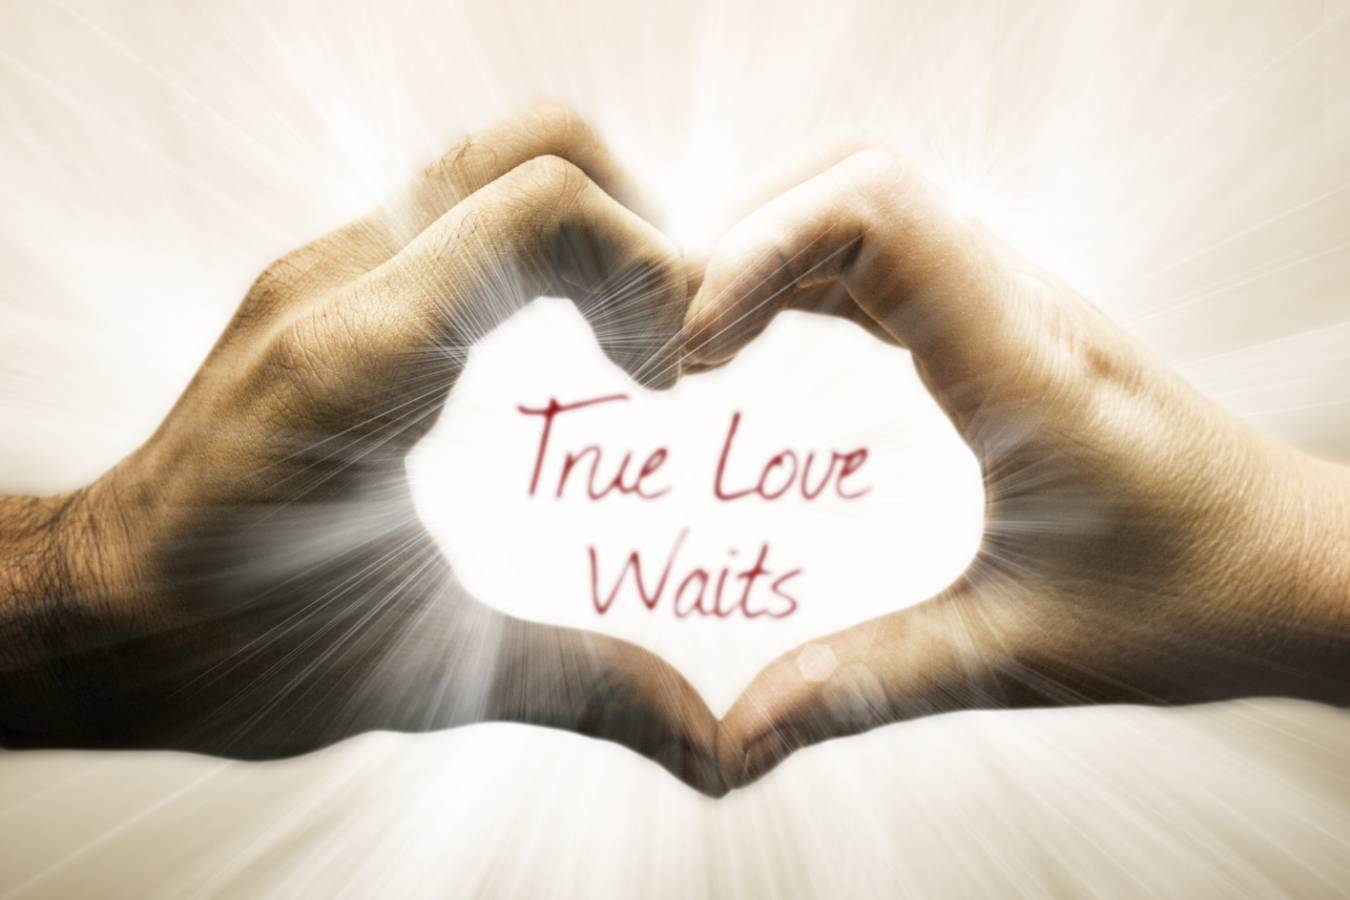 True love waits means that you are faithful in BODY, MIND and